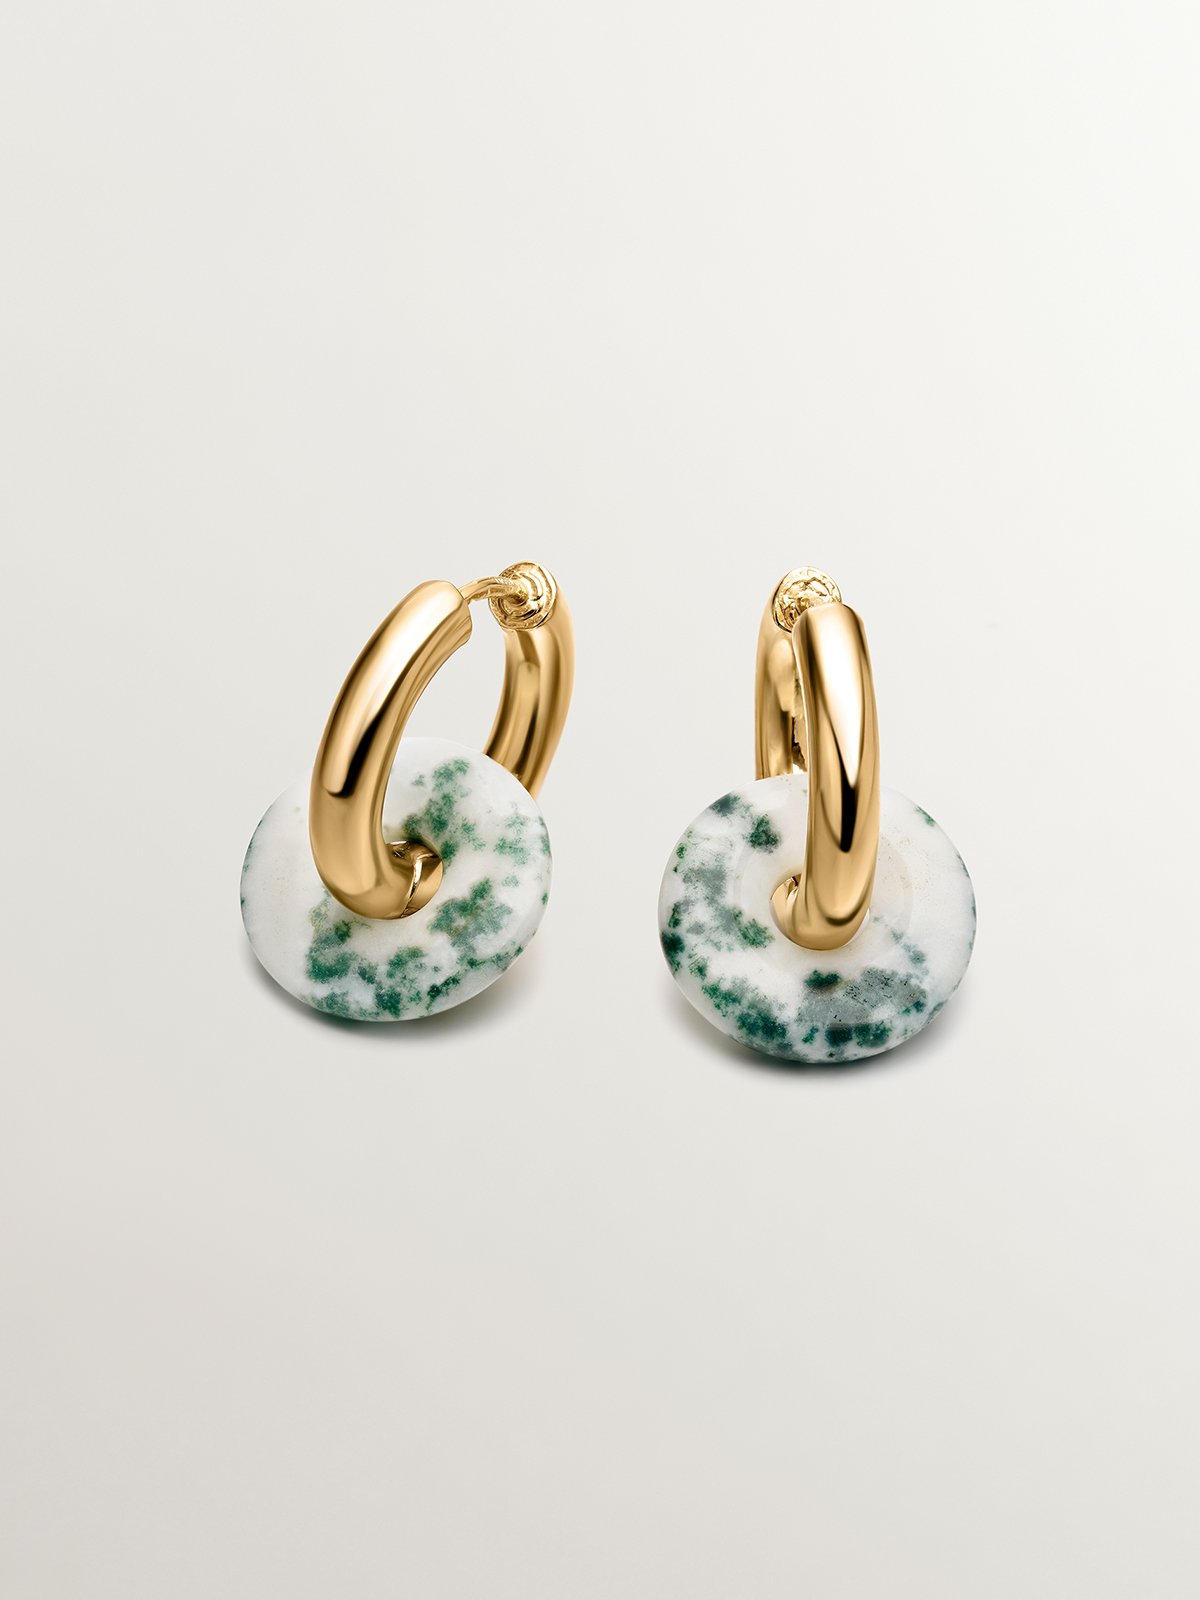 925 silver ring earrings in 18k yellow gold with green agate